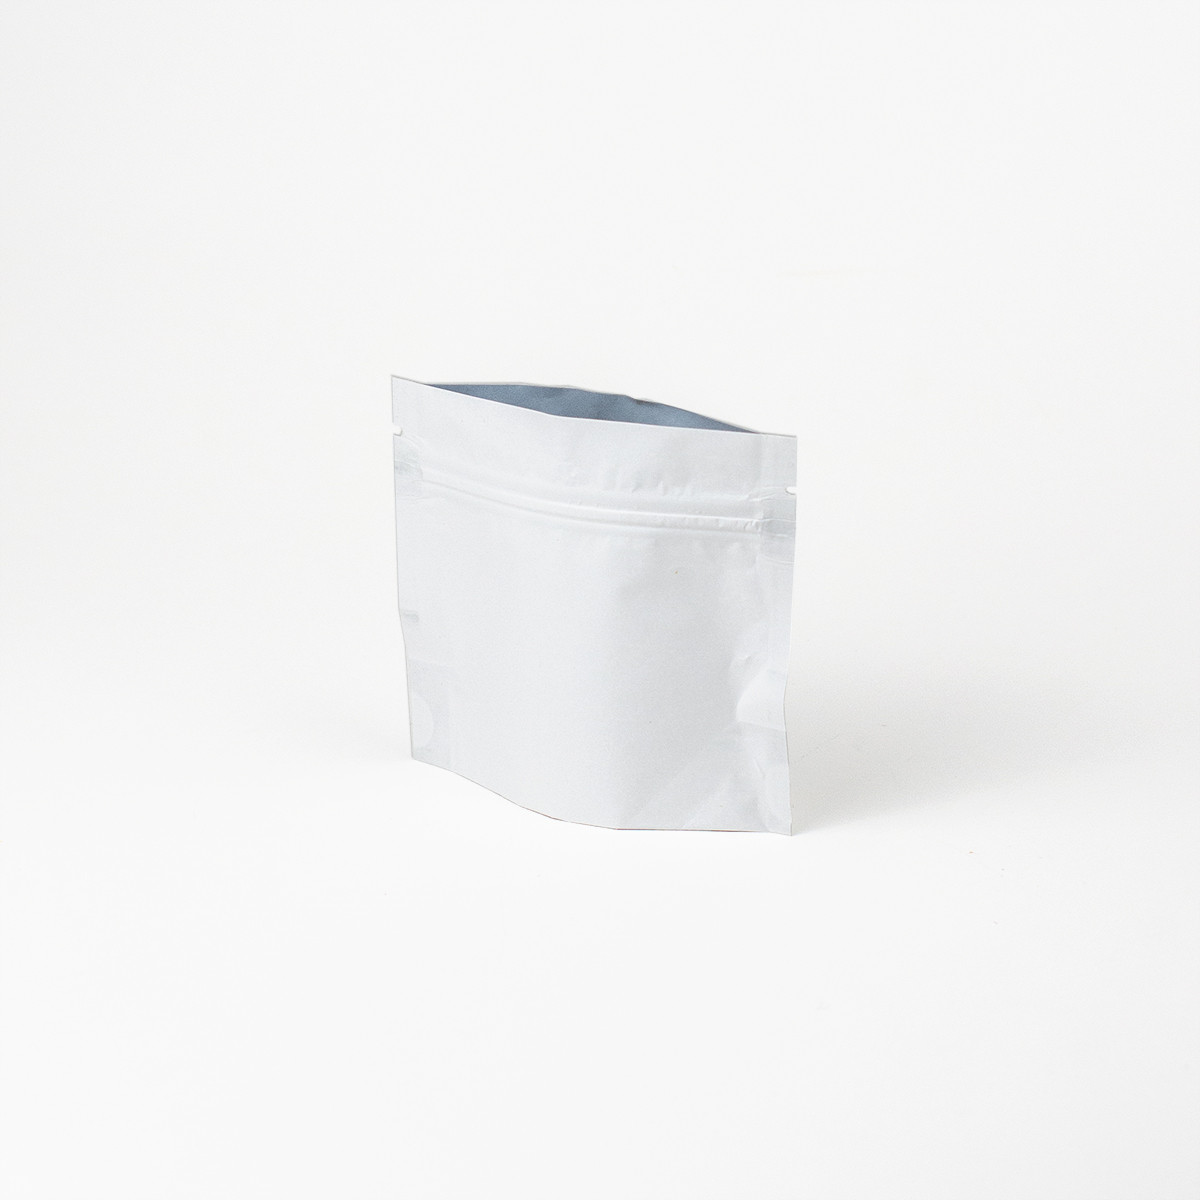 1 oz Stand Up Zipper Pouch - White with Clear Front [ZBGW1]